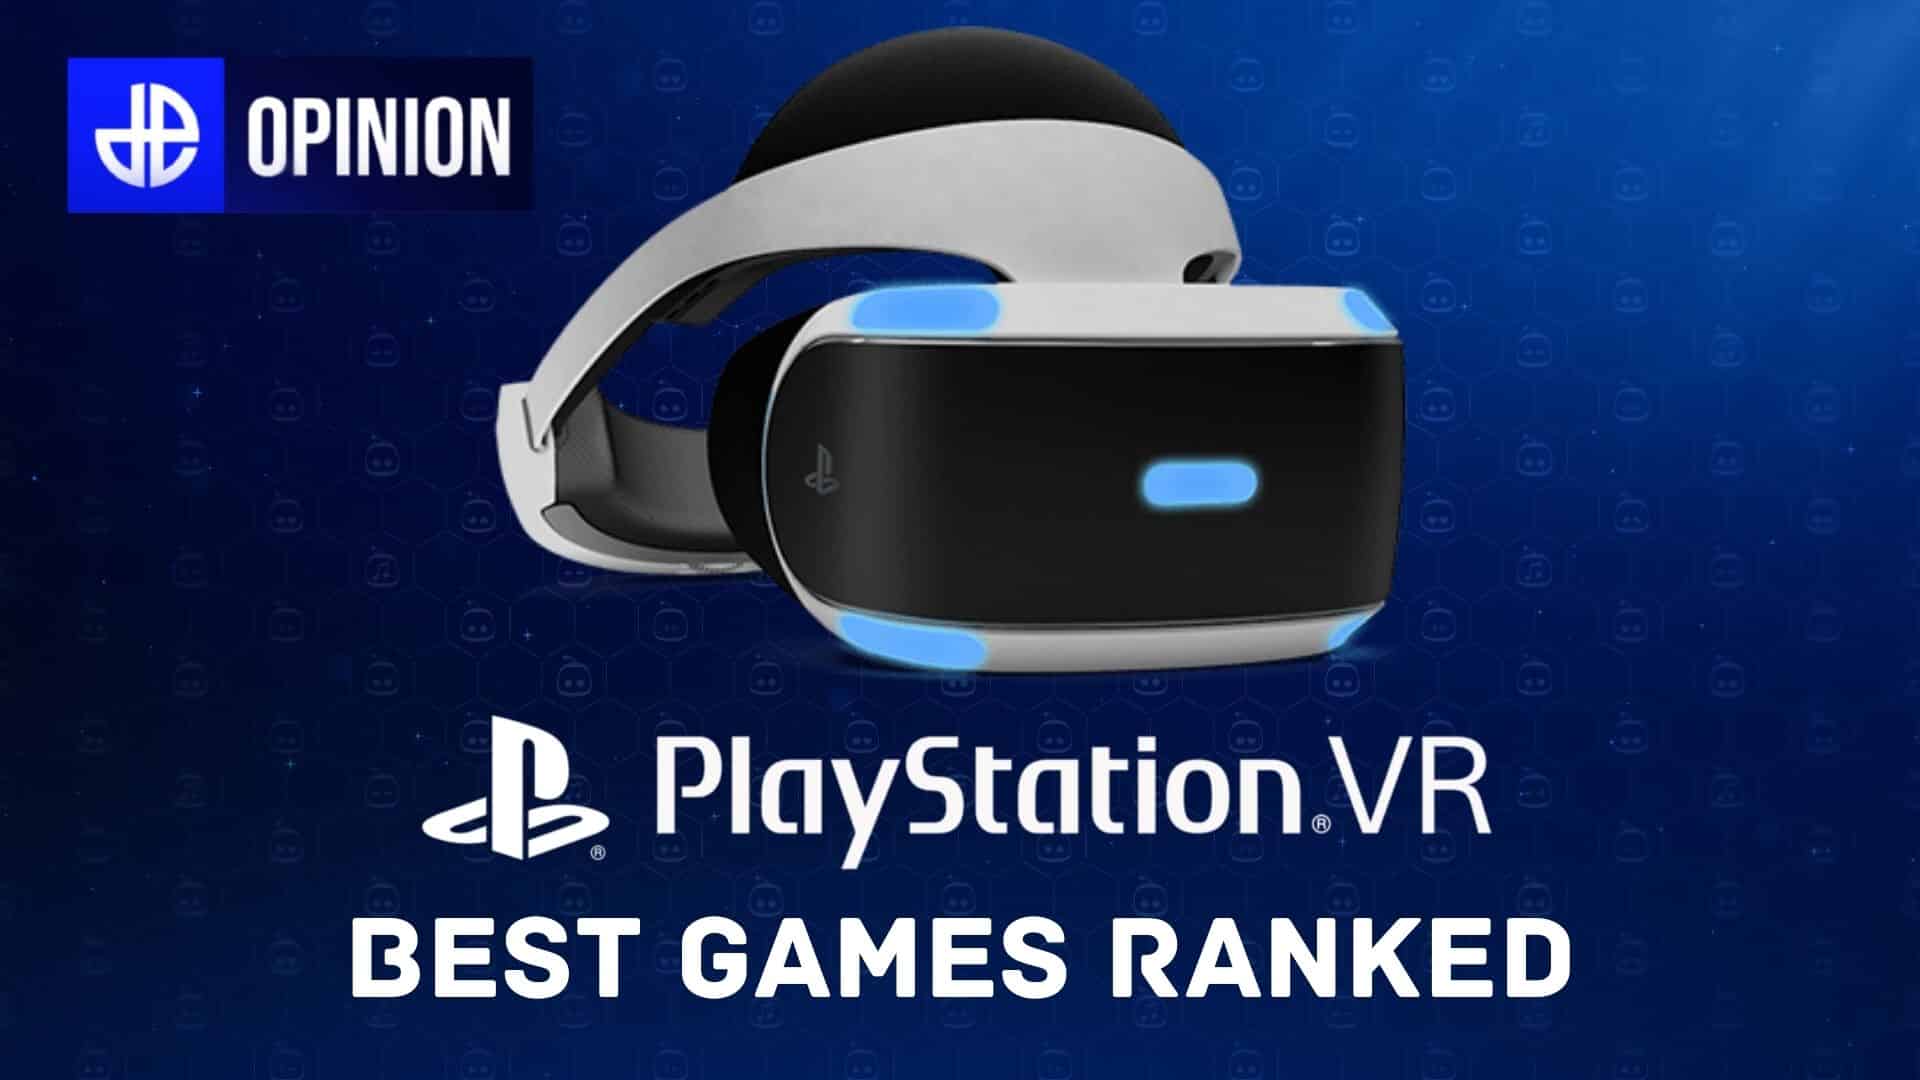 PlayStation VR games for Sony's virtual reality headset